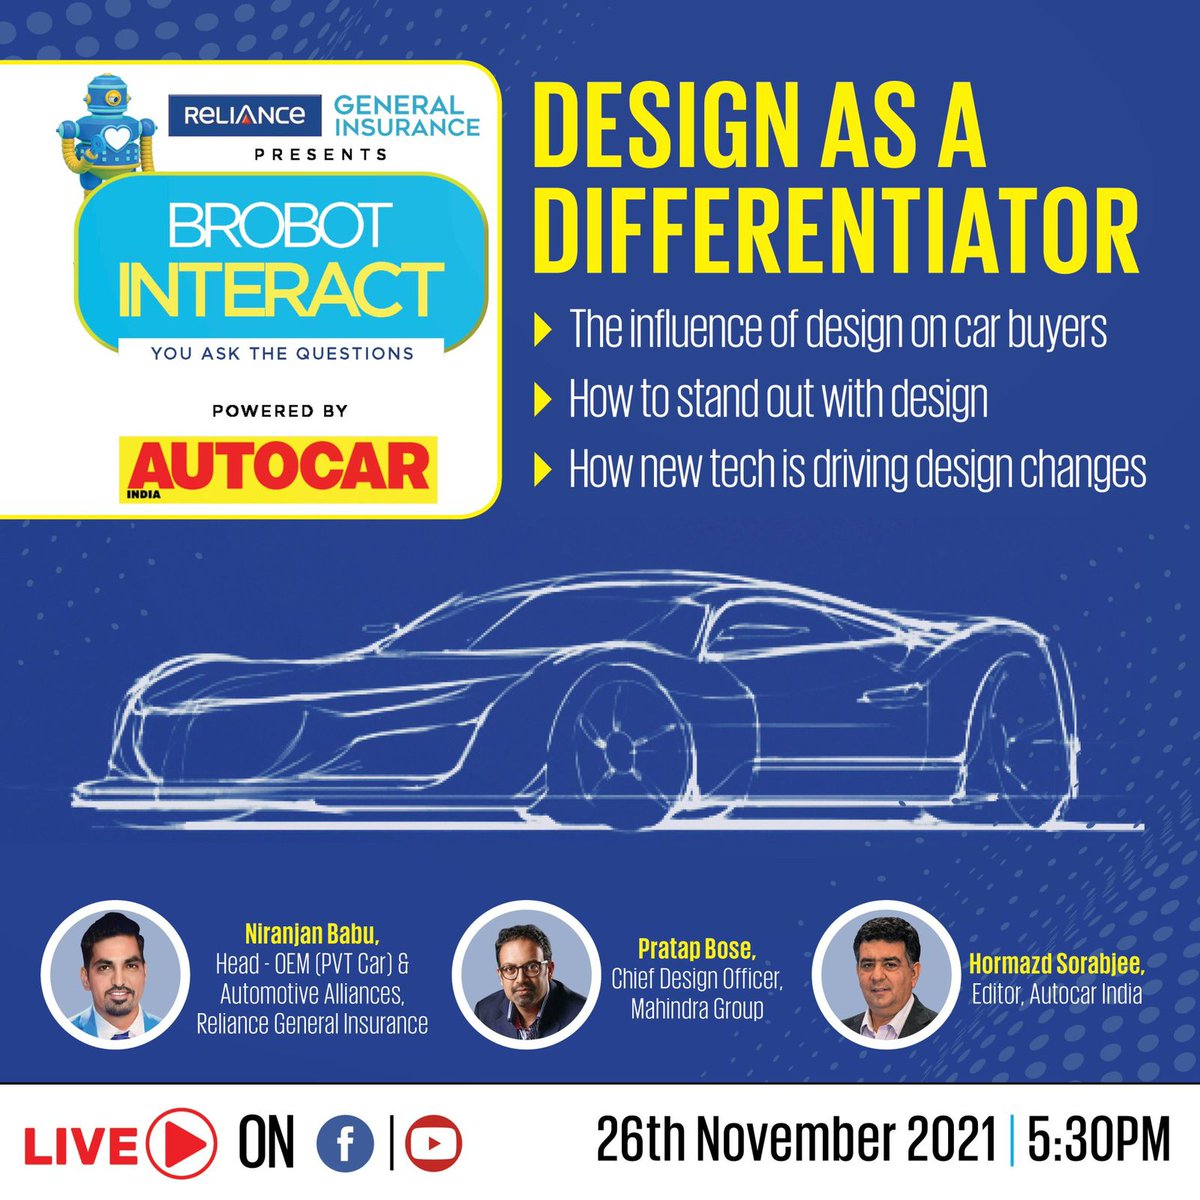 We're discussing automotive design as a differentiator in the latest #BrobotInteract session! Joining us is @BosePratap and @RelianceGenIn's Niranjan Babu. Tune in LIVE on November 26 at 5:30pm. #RelianceGeneralInsurance #LiveSmart #TechnologyMeetsInsurance #Tech+❤️